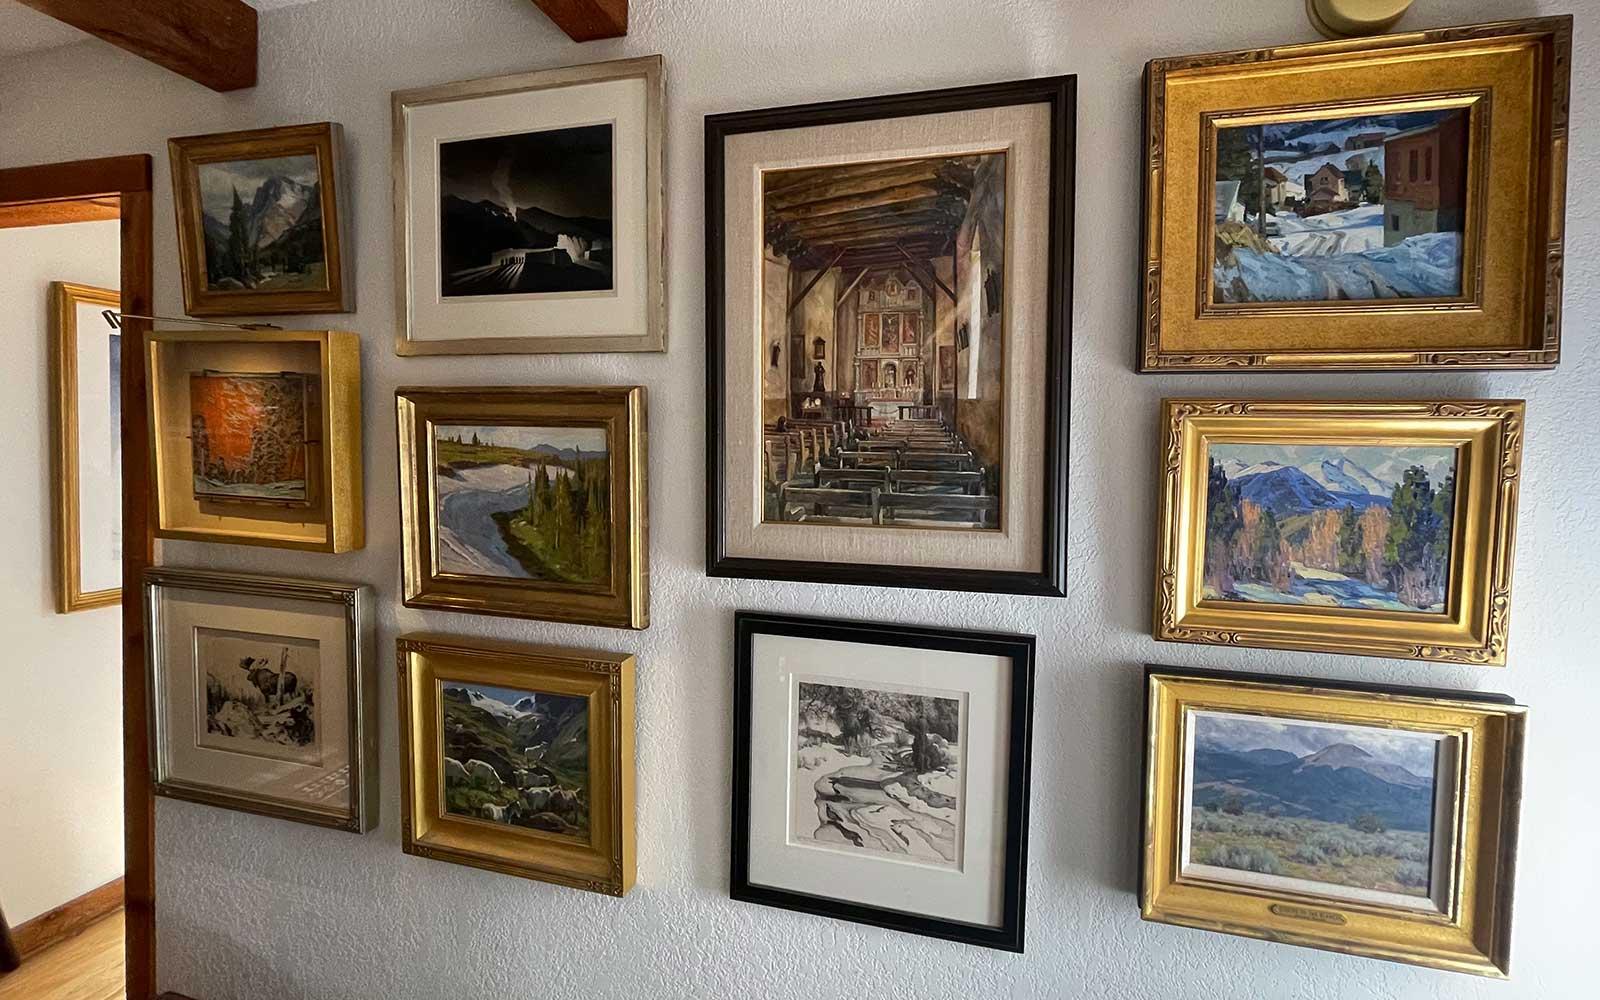 Gallery wall in the Newtons’ home.